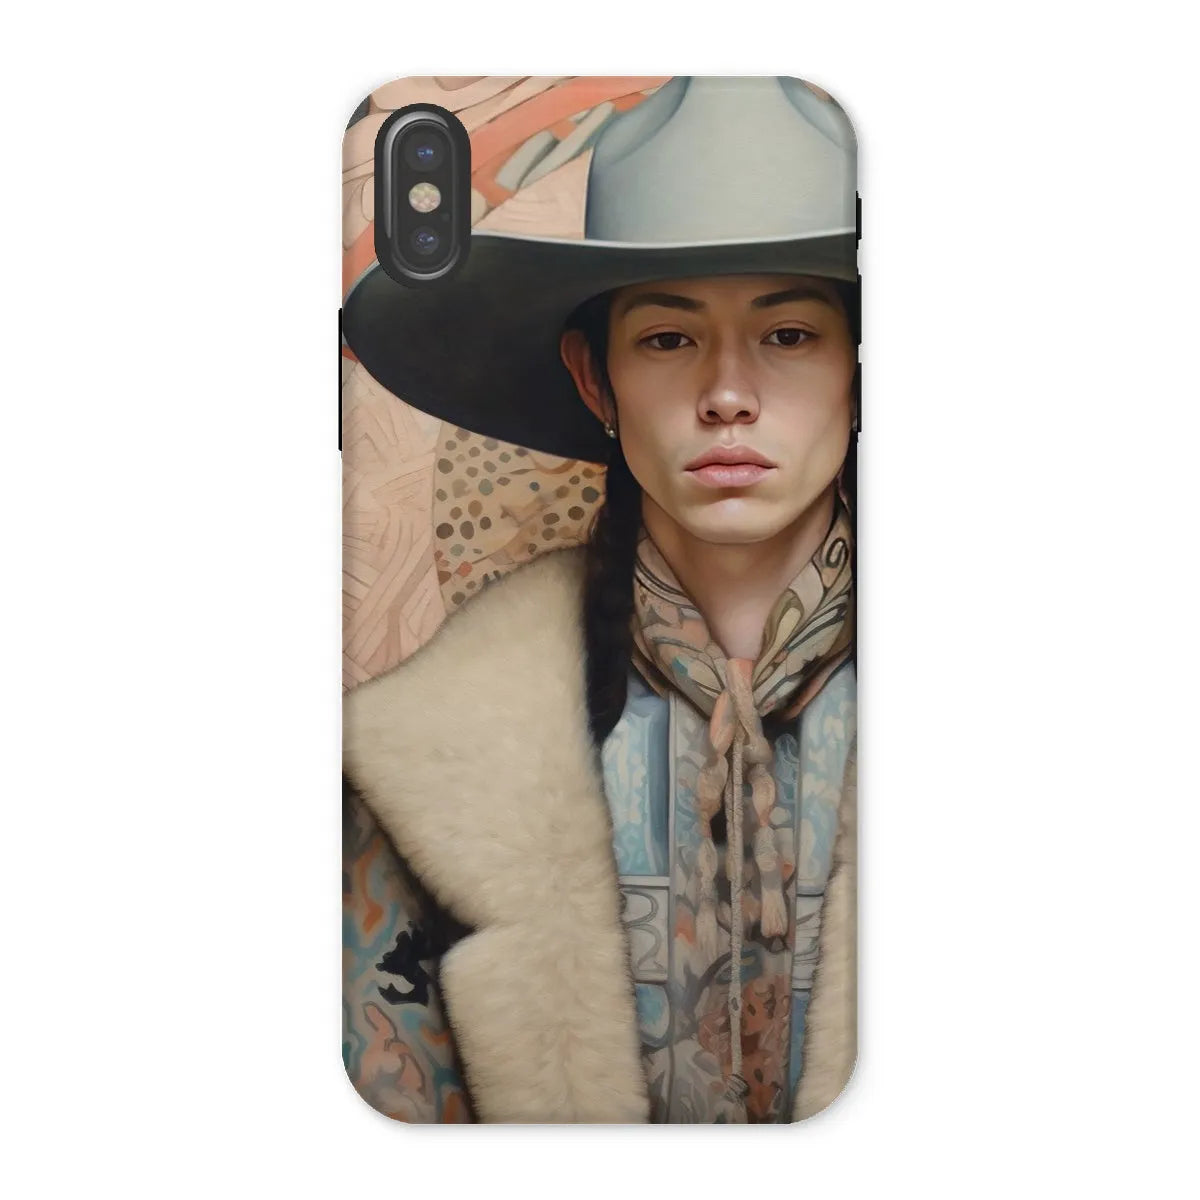 Jacy The Gay Cowboy - Dandy Gay Aesthetic Art Phone Case - Iphone x / Matte - Mobile Phone Cases - Aesthetic Art